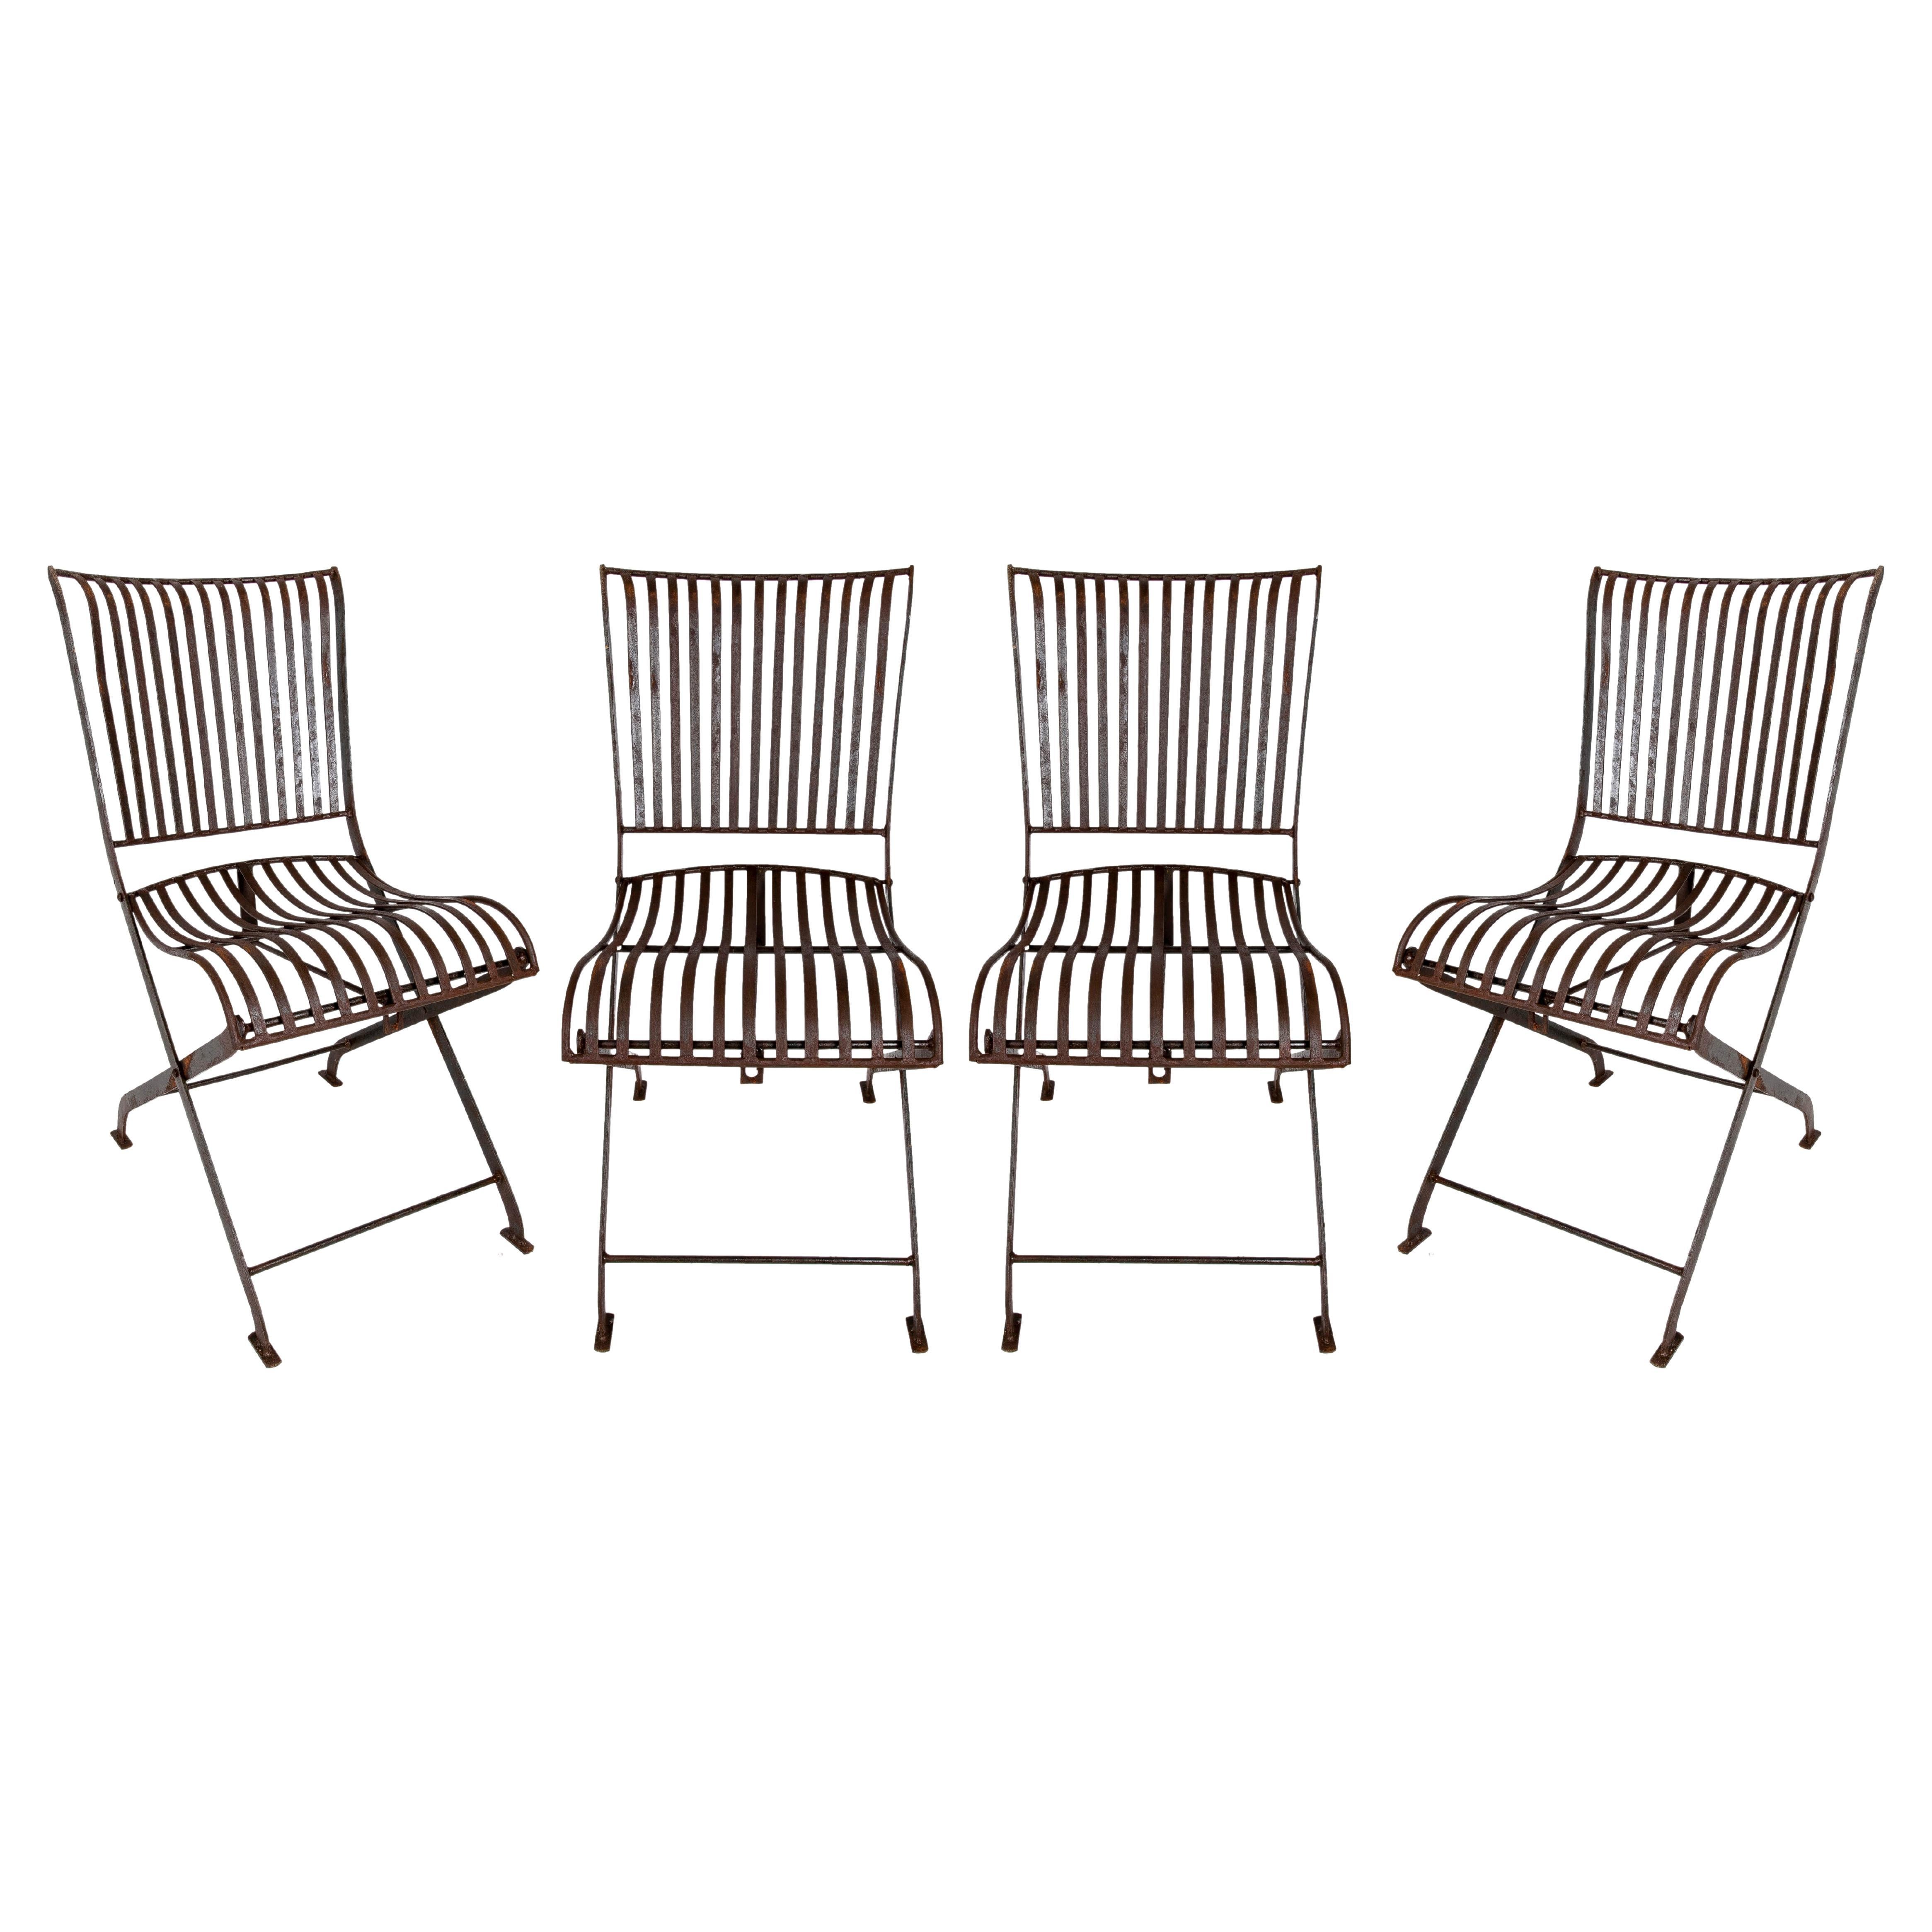 Set of Four Foldable Iron Garden Chairs For Sale